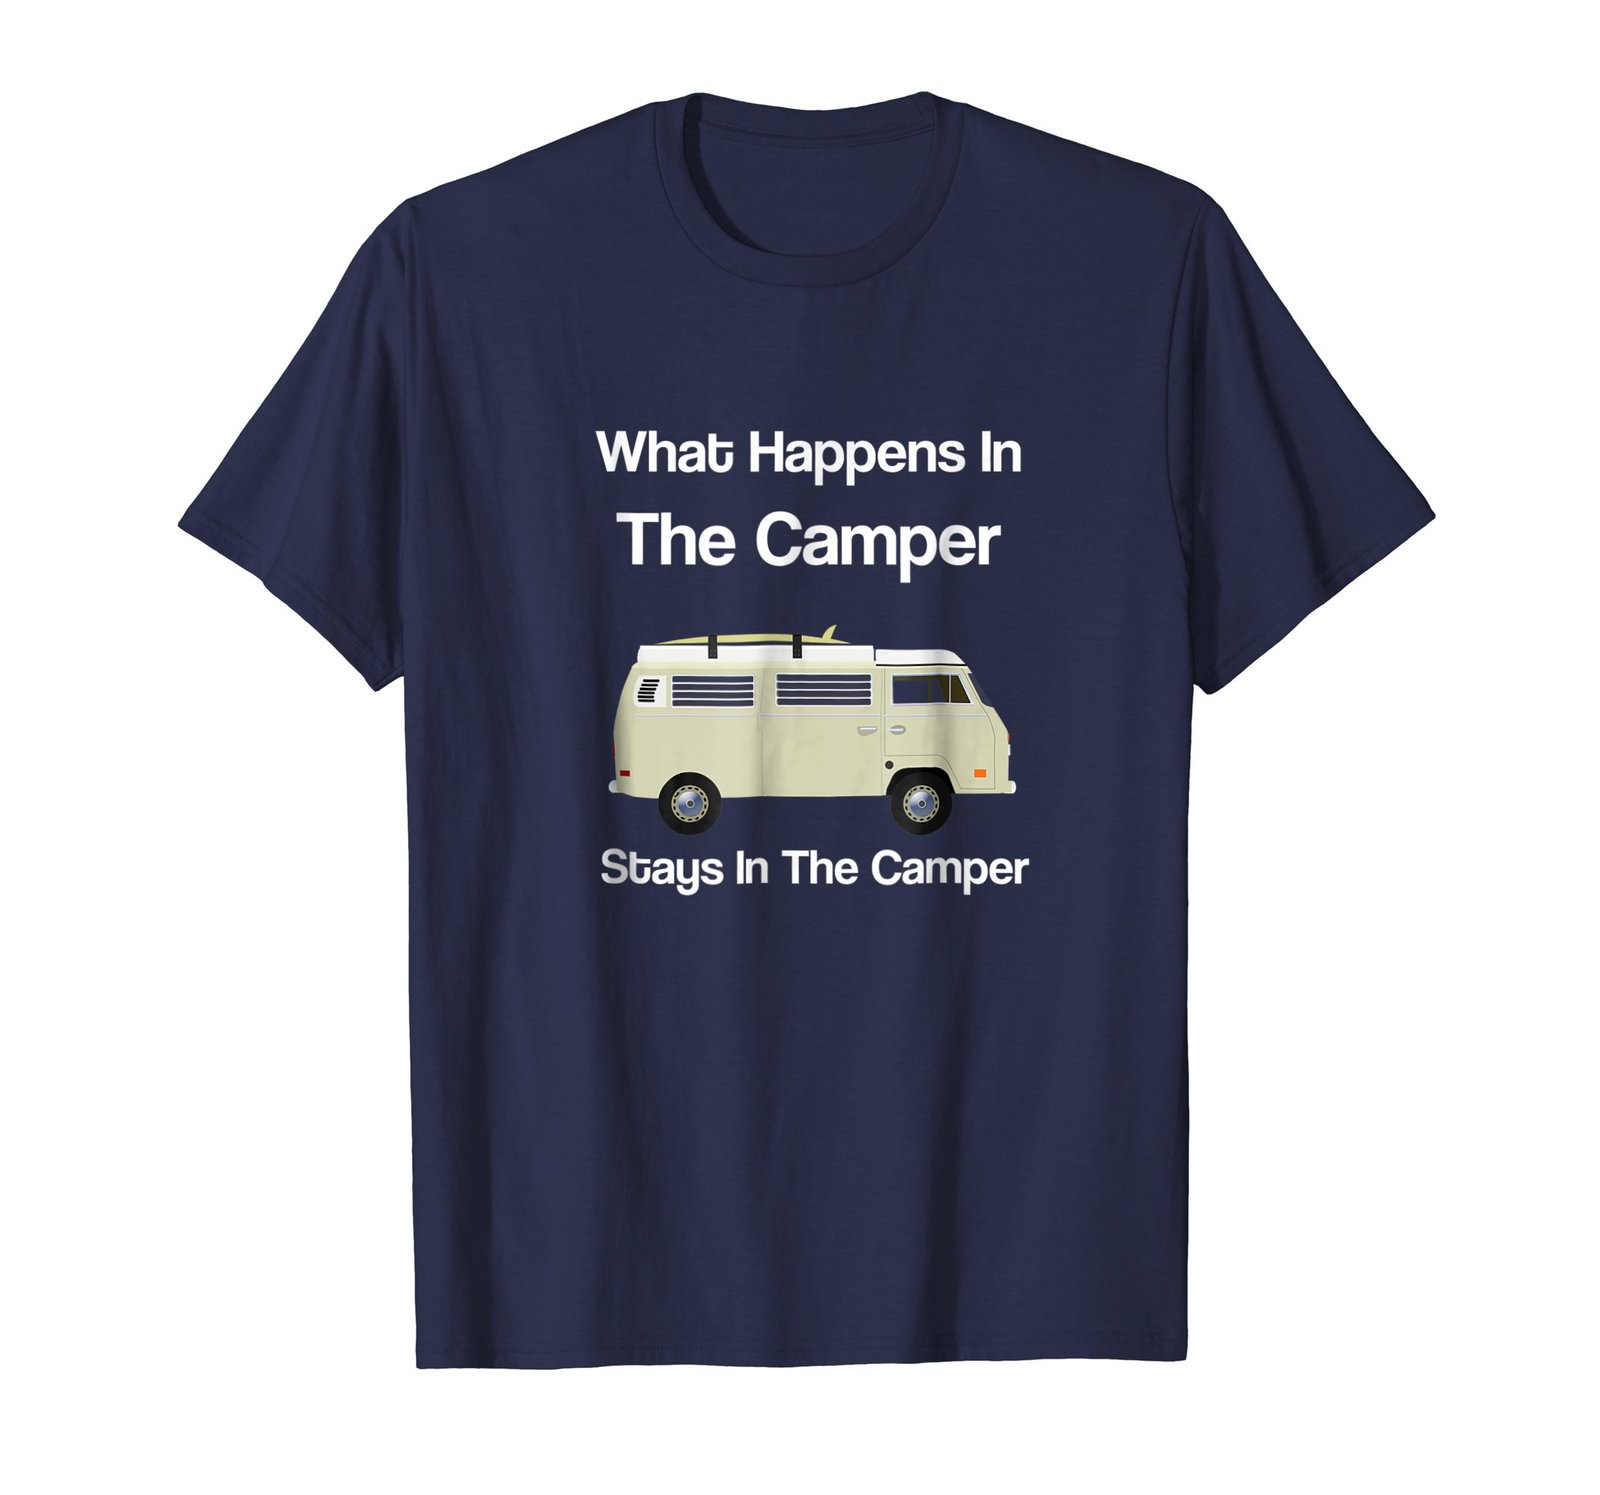 Funny Shirts - What Happens in the Camper Stays in the Camper t-shirt Men